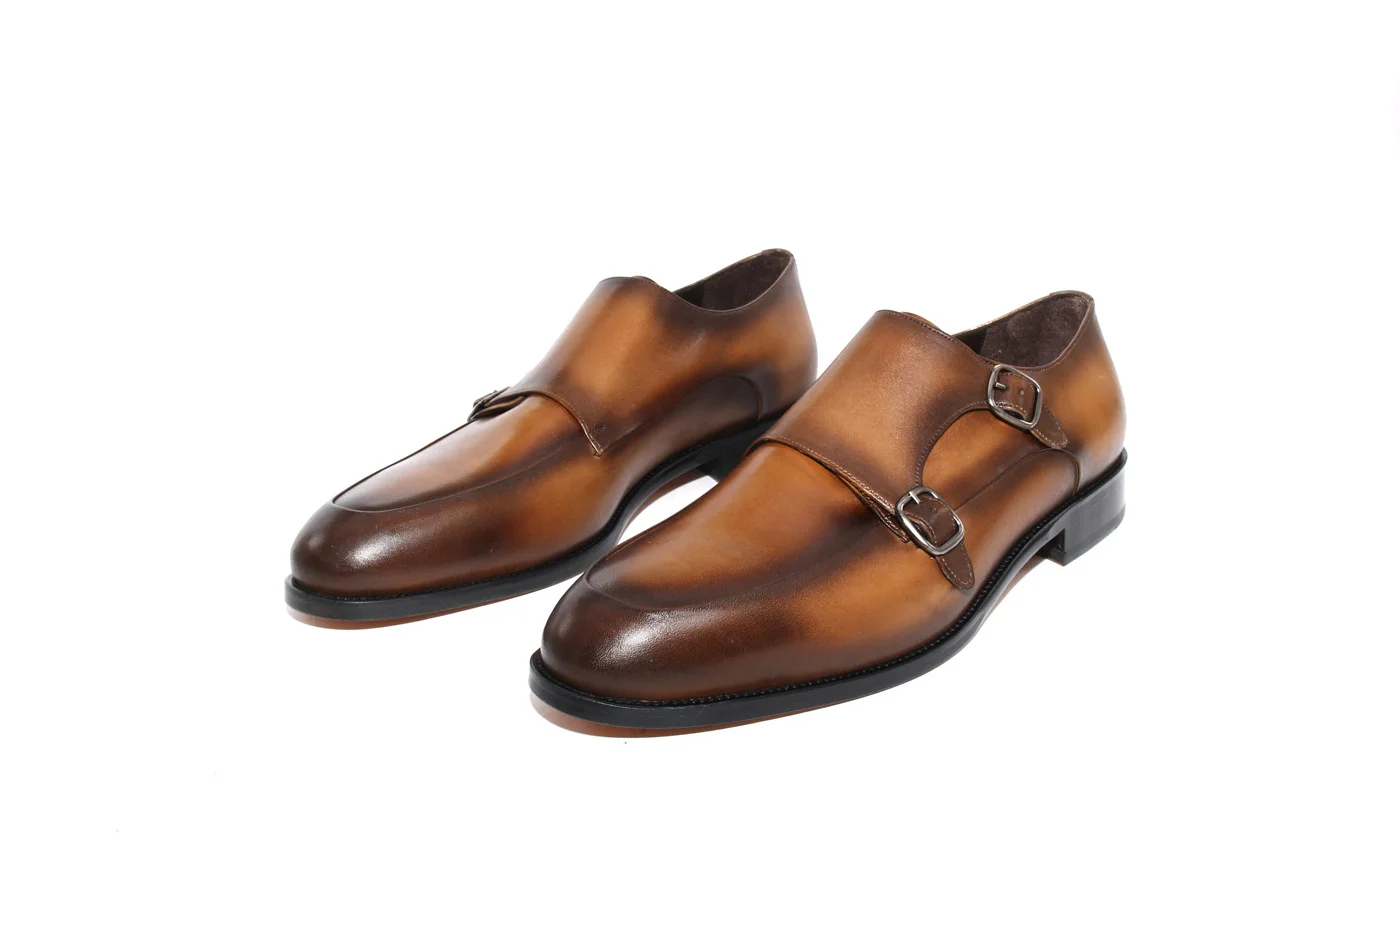 

SHENBIN'S Handmade Double Strap Monks with Tobacco Patina and Premium Leather Soles, Premium Work and Business Shoes